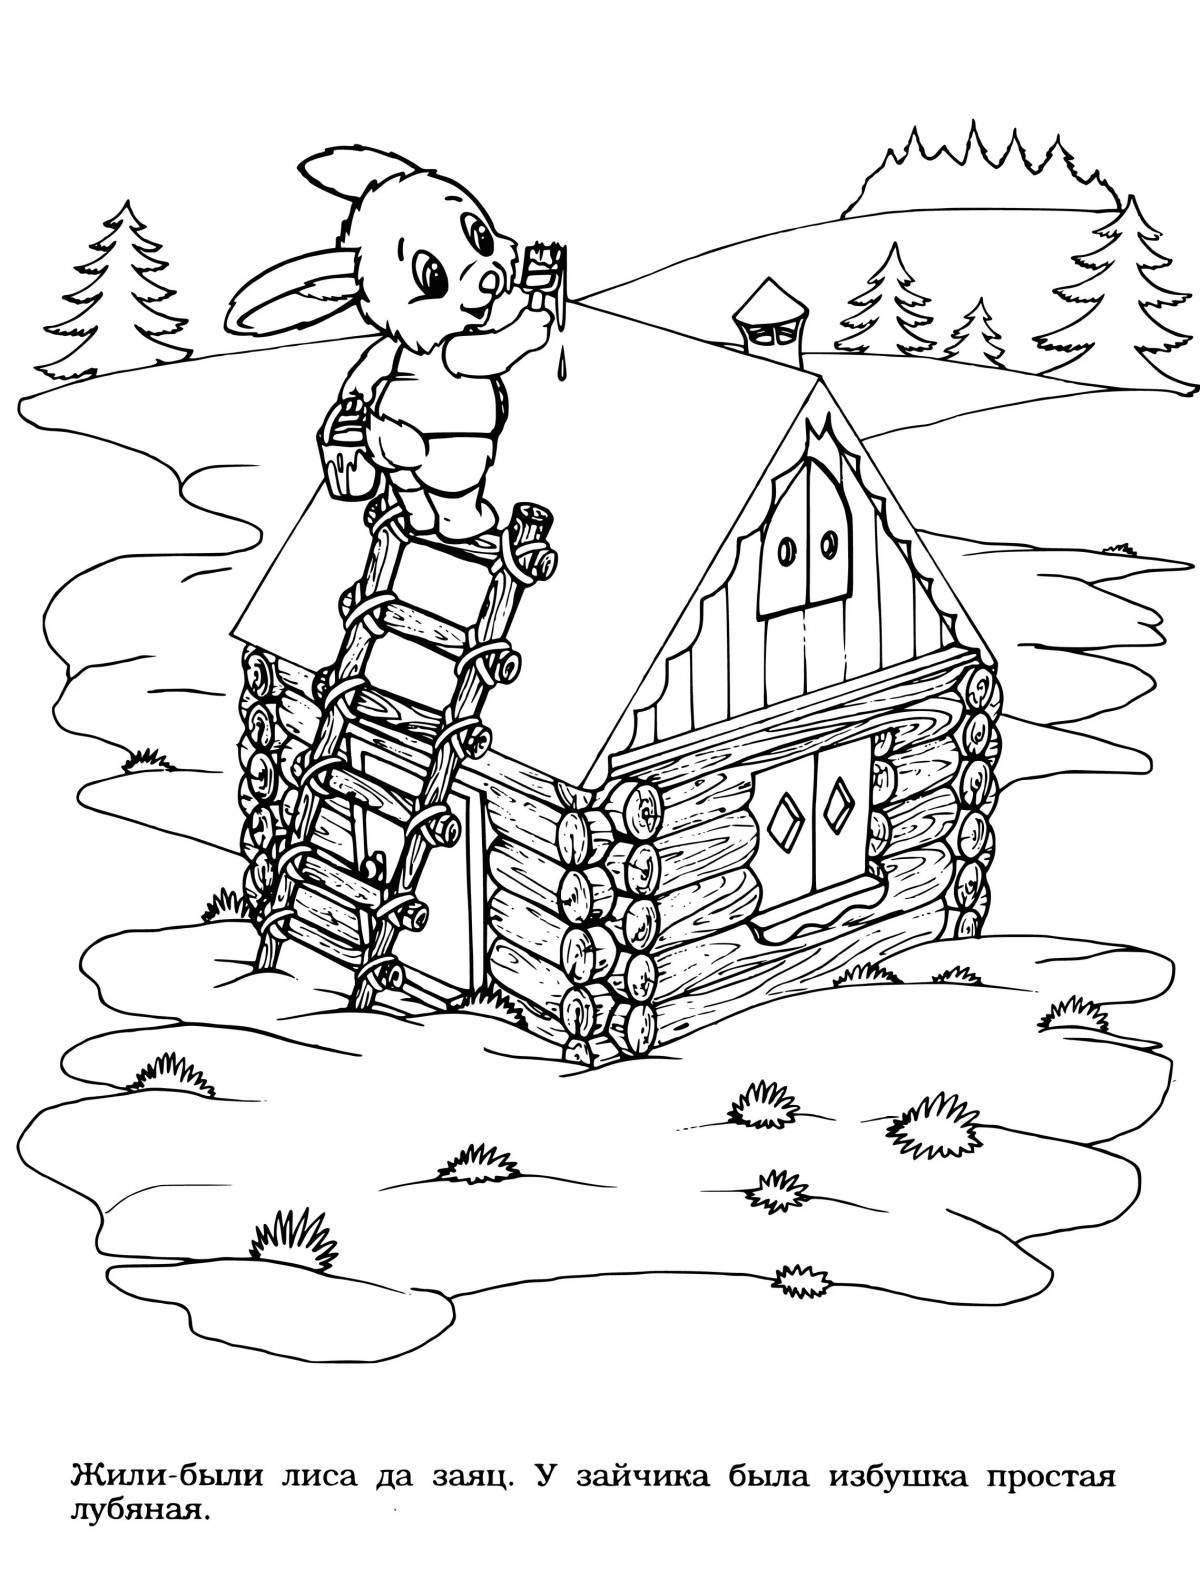 Animated rabbit hut coloring page